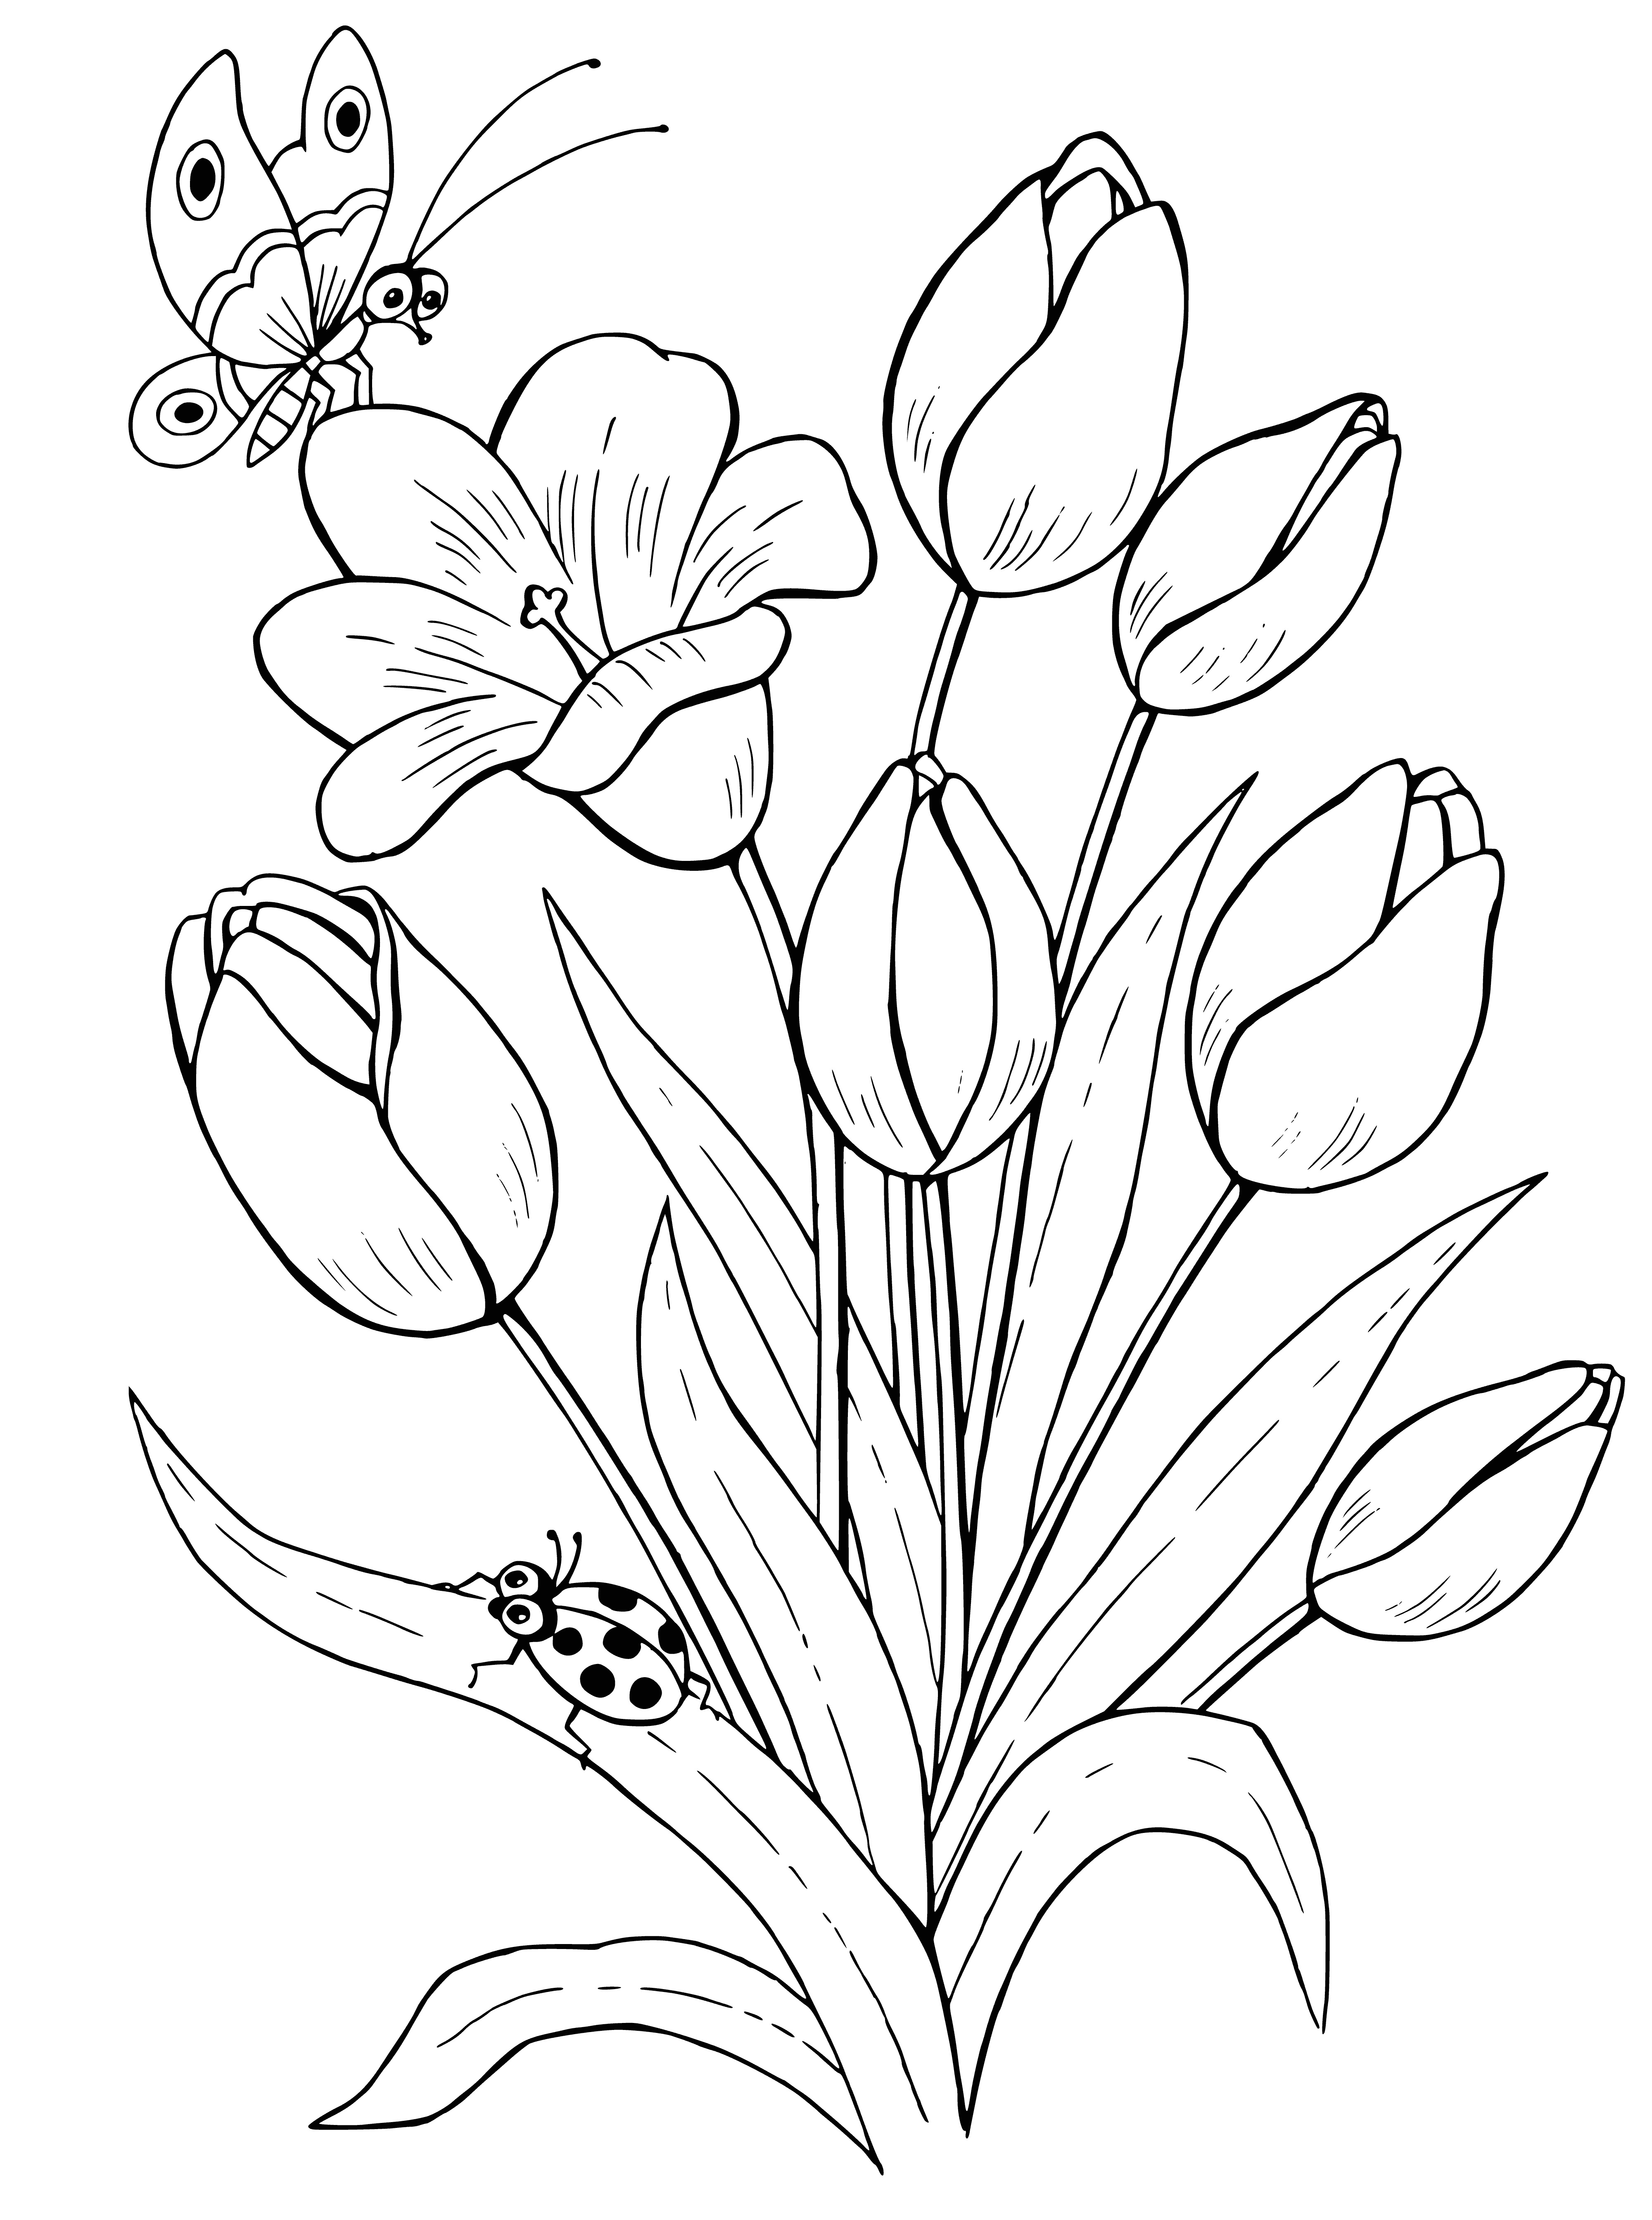 Tulip coloring page